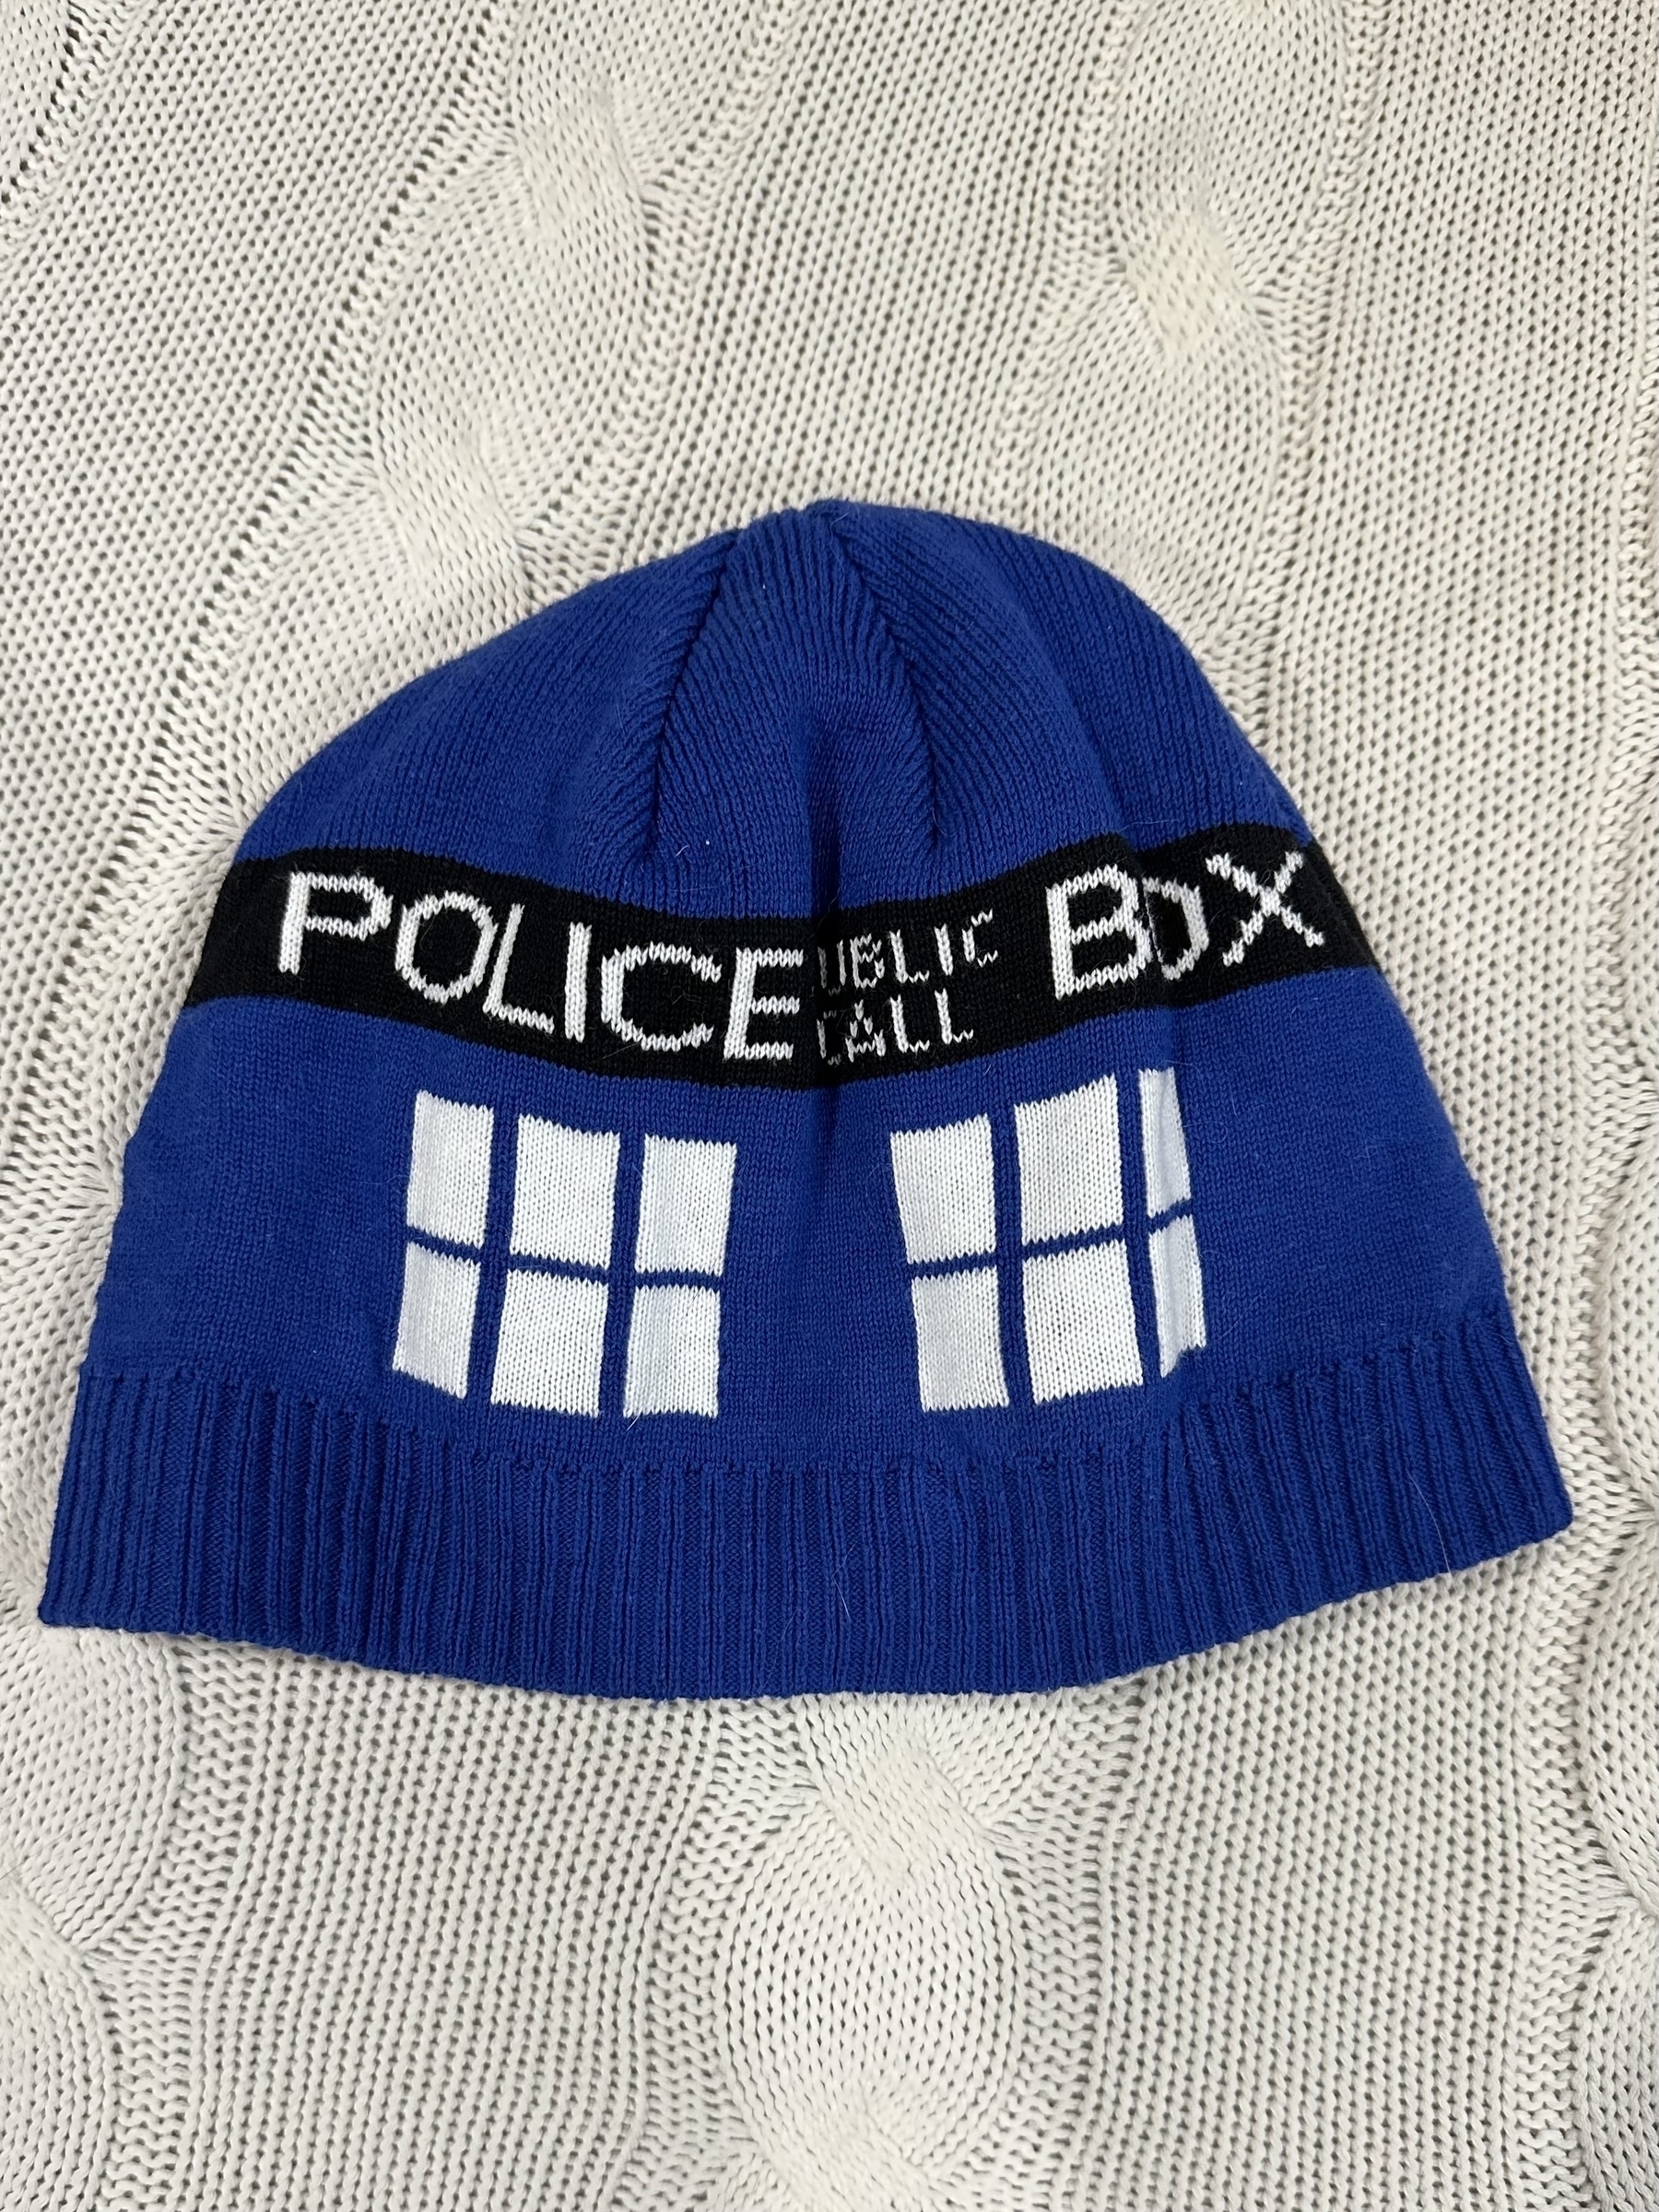 A beanie that looks like the TARDIS from the tv show Doctor Who. It is coloured blue with white windows and a black stripe above them that reads “Police Public Call Box”. 